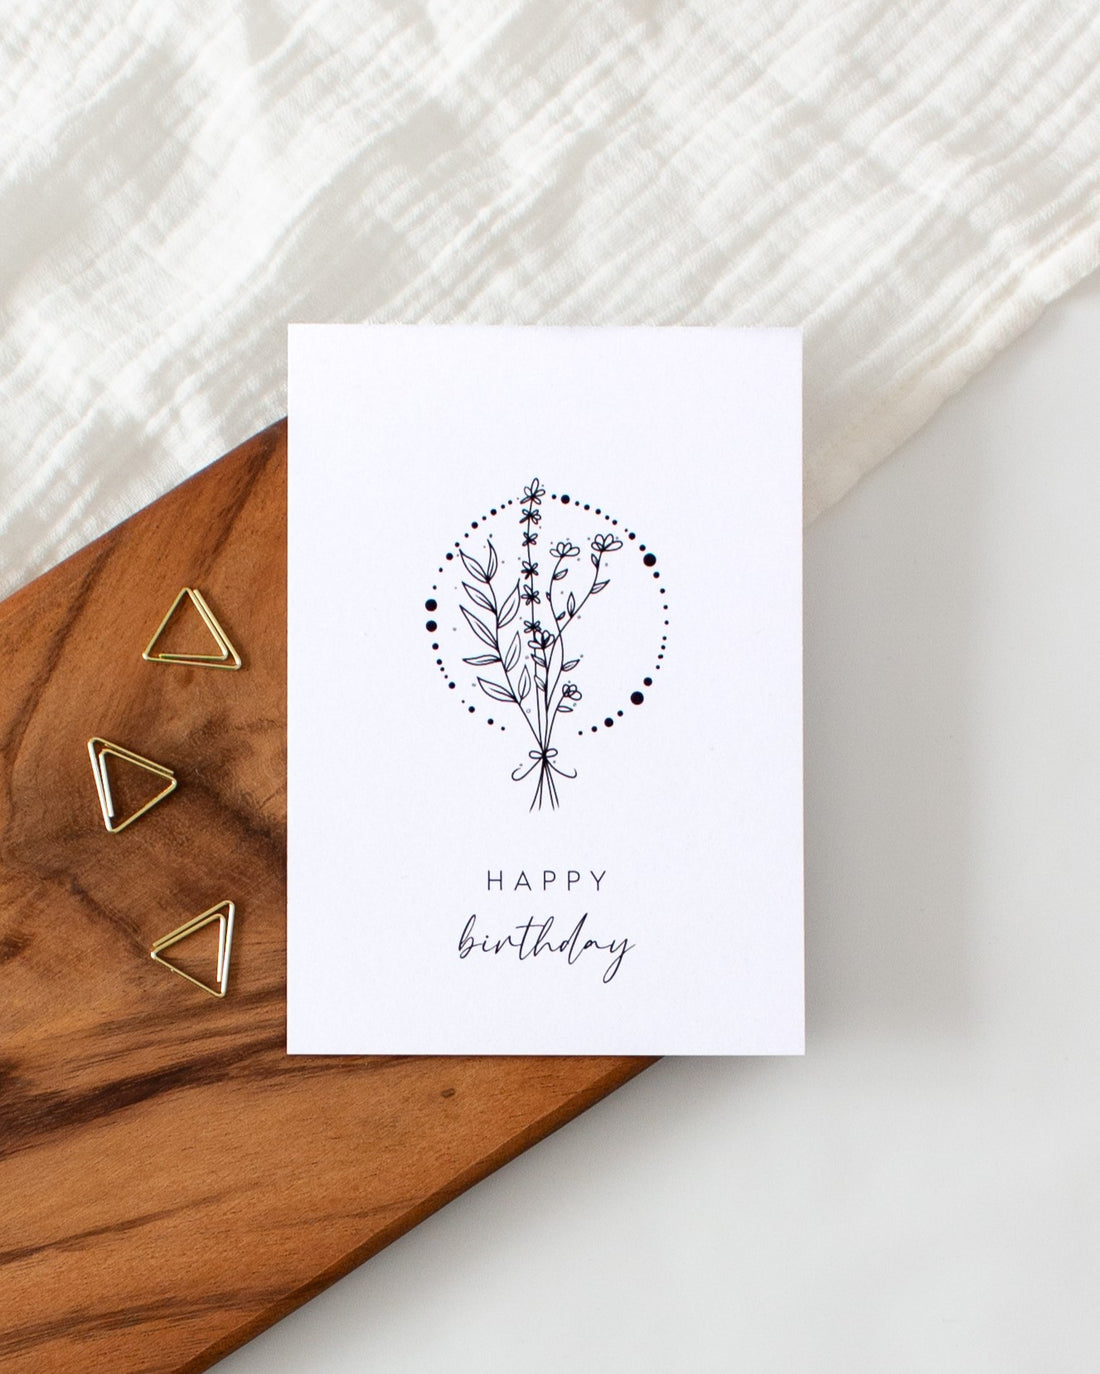 A postcard laying on a wooden board with some golden triangle paperclips and a white cloth in the background. The postcard design shows a lineart drawing of some flowers and branches tied together, with a circle consisting of dots of varying sizes around them. Below that are two lines of text saying &quot;Happy Birthday&quot;.